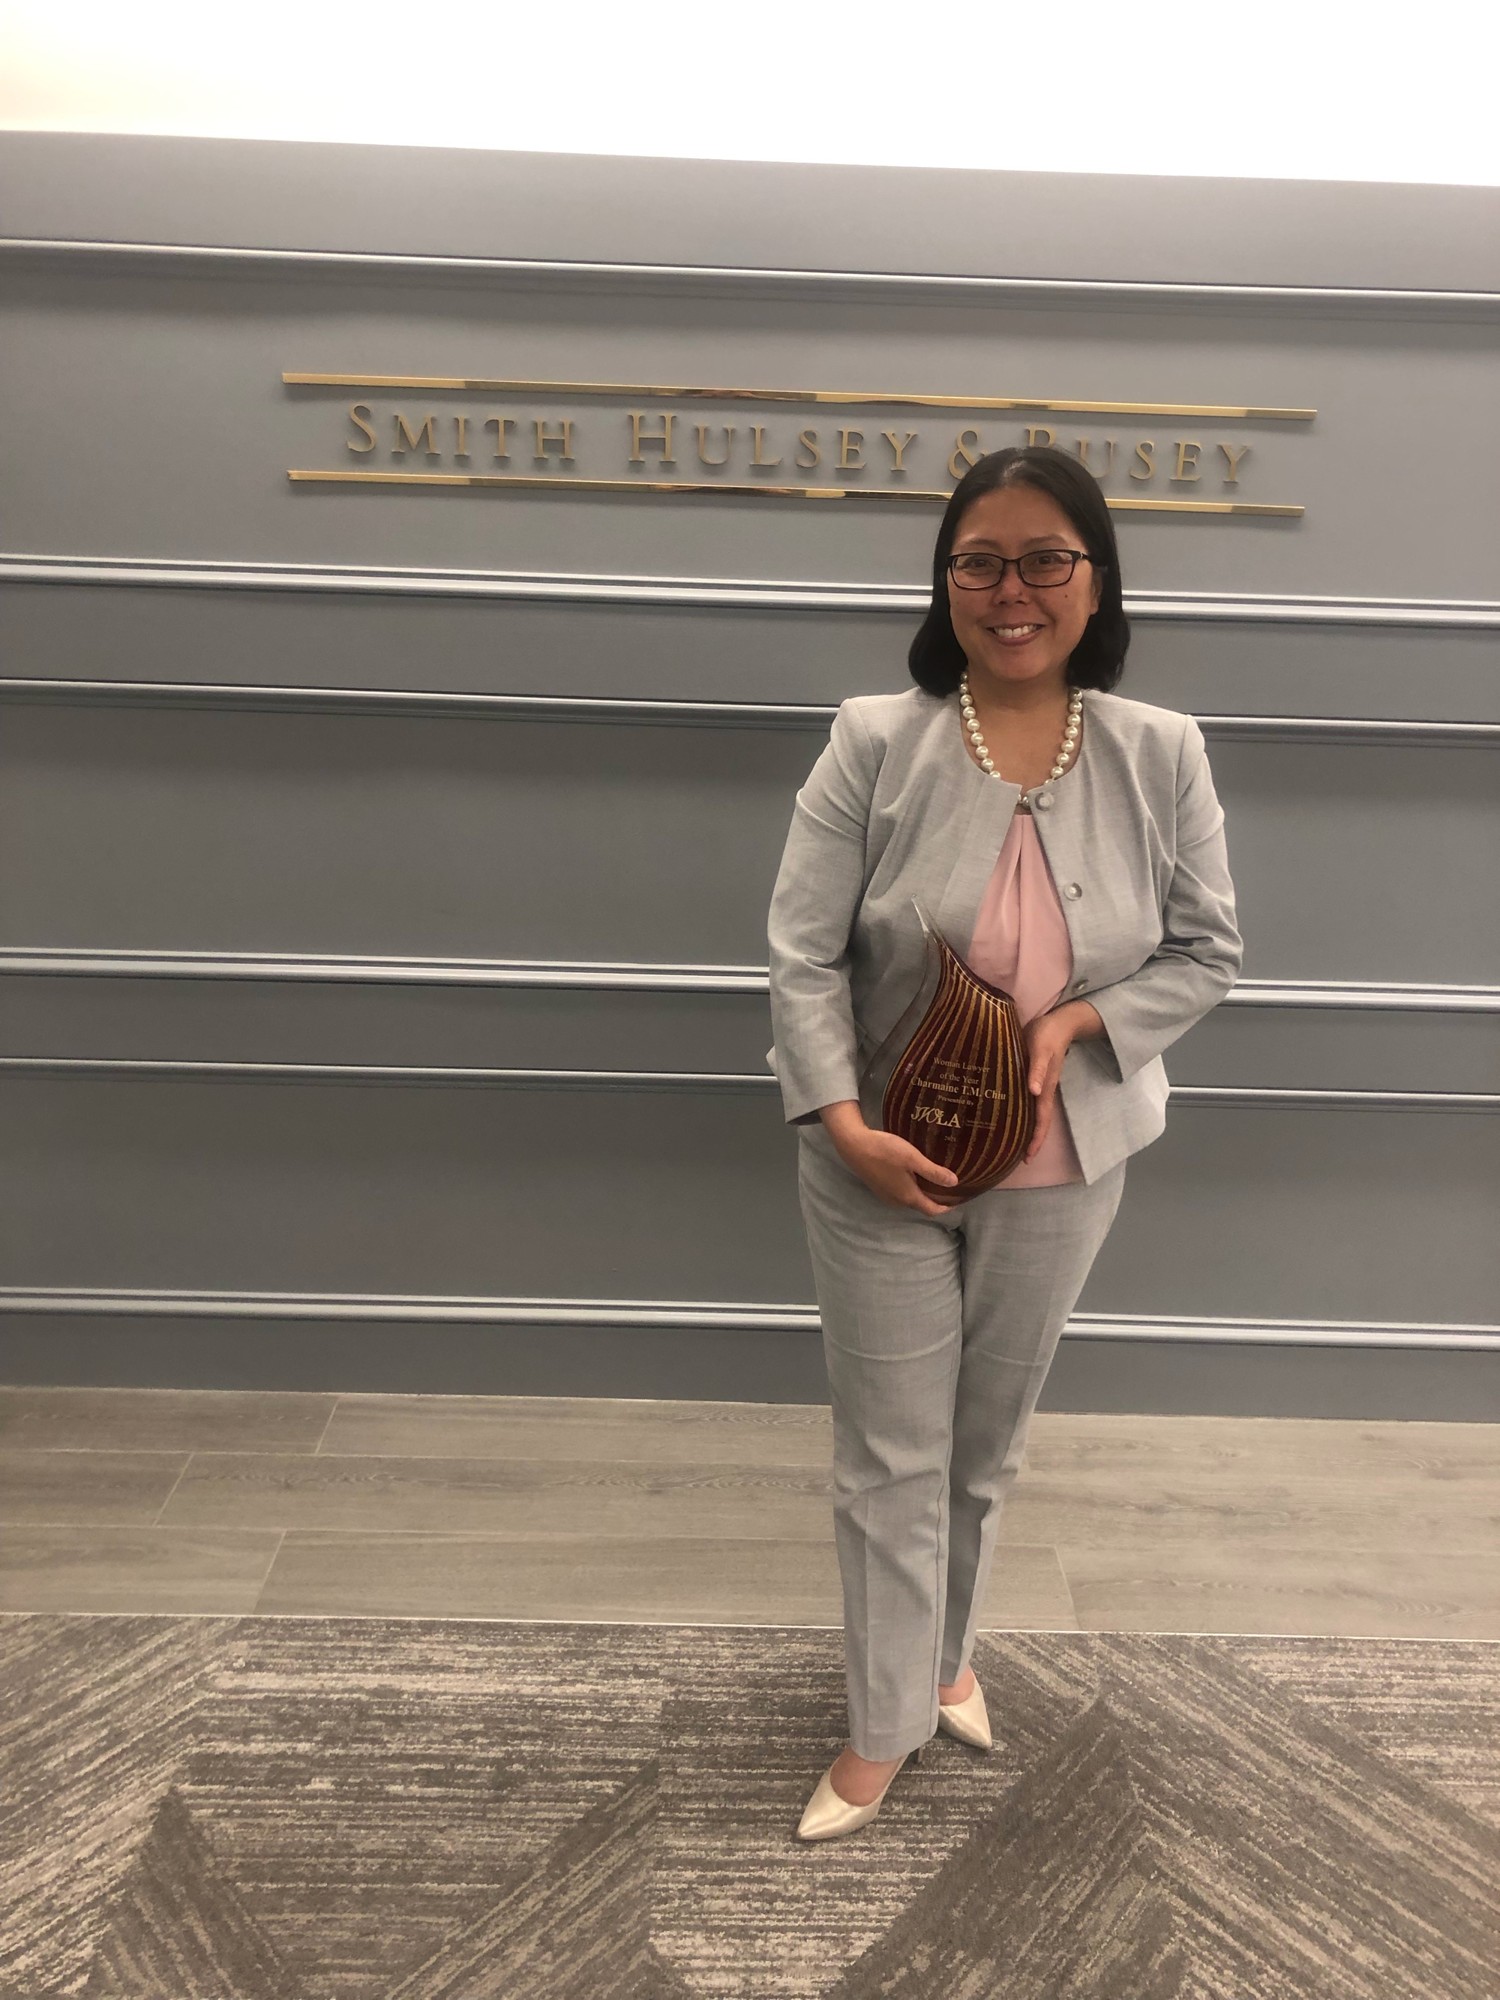 Charmaine T.M. Chiu, a partner at Smith Hulsey & Busey, is the 2021 Jacksonville Women Lawyers Association Woman Lawyer of the Year.